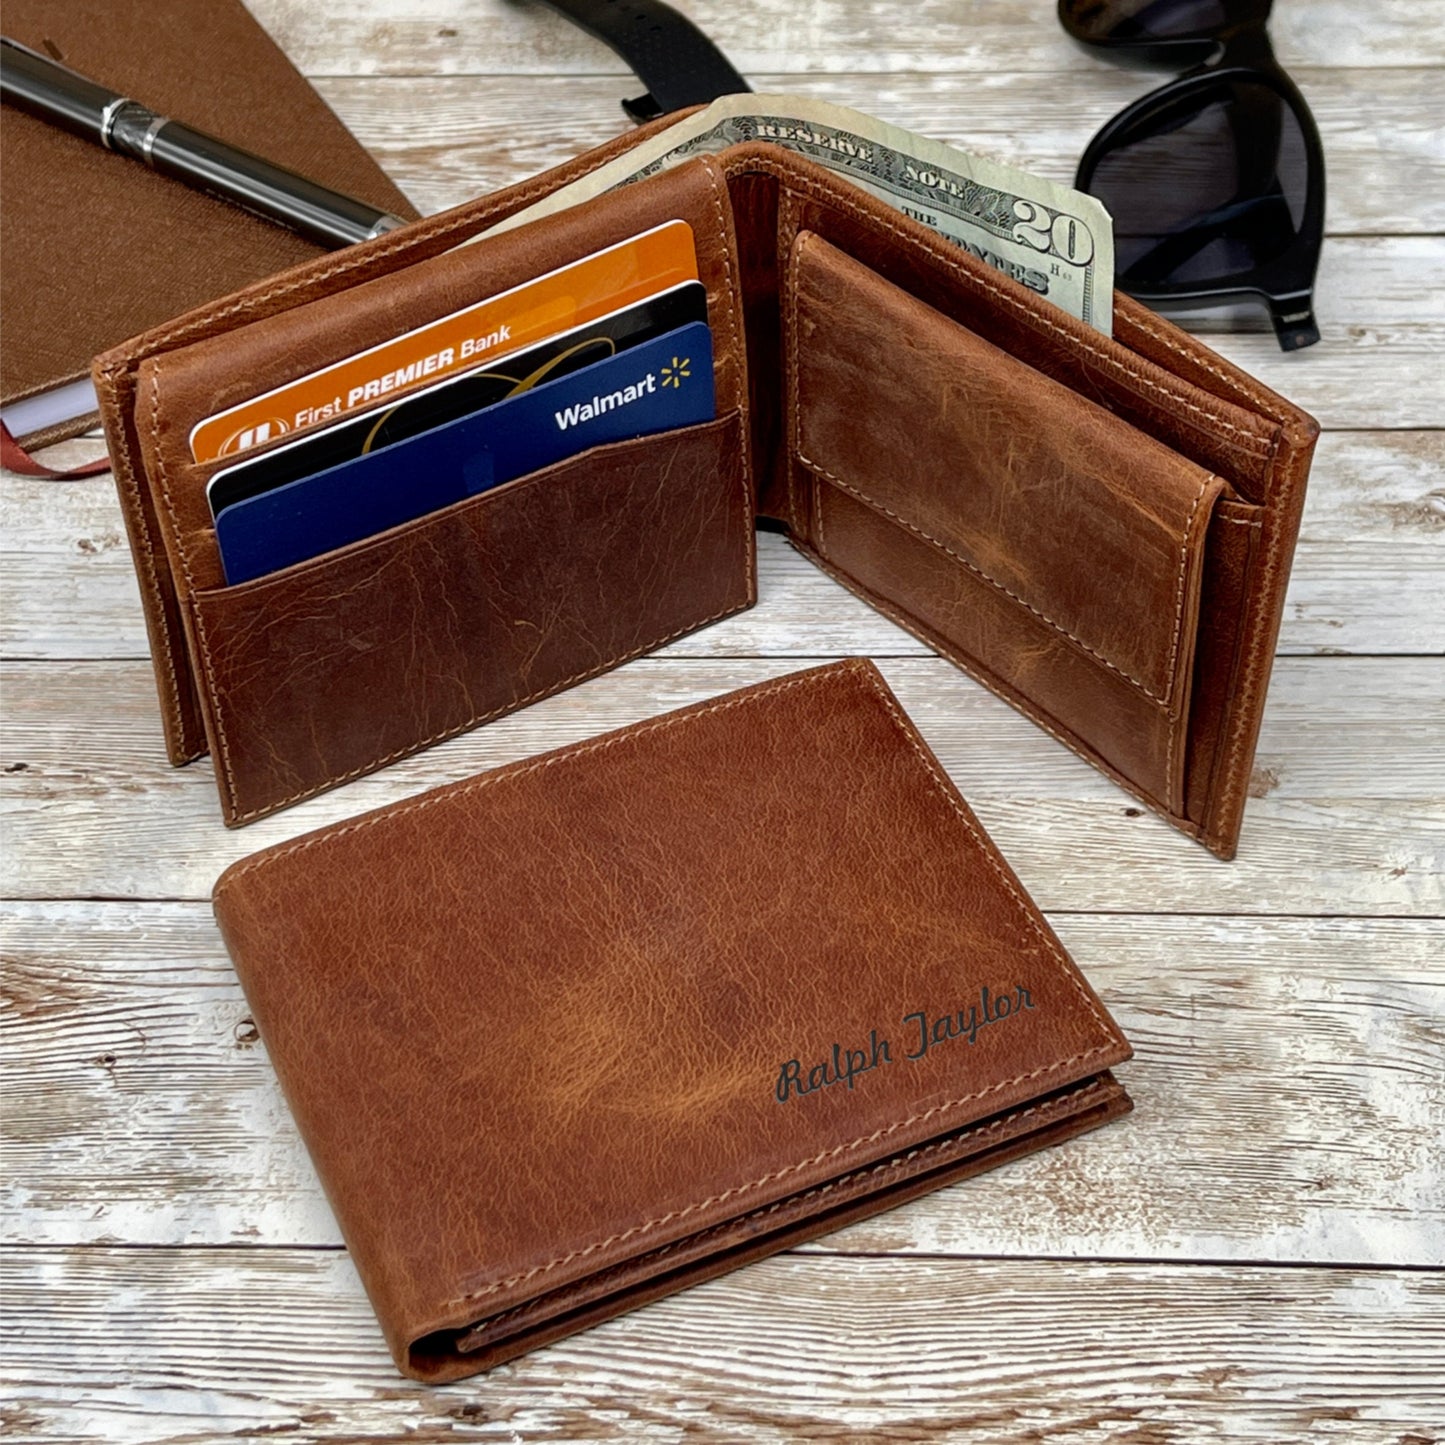 Anniversary Gift for Him,Personalized Wallet,Mens Wallet,Engraved Wallet,Leather Wallet,Custom Wallet,Gift for Dad,Boyfriend Gift for Men